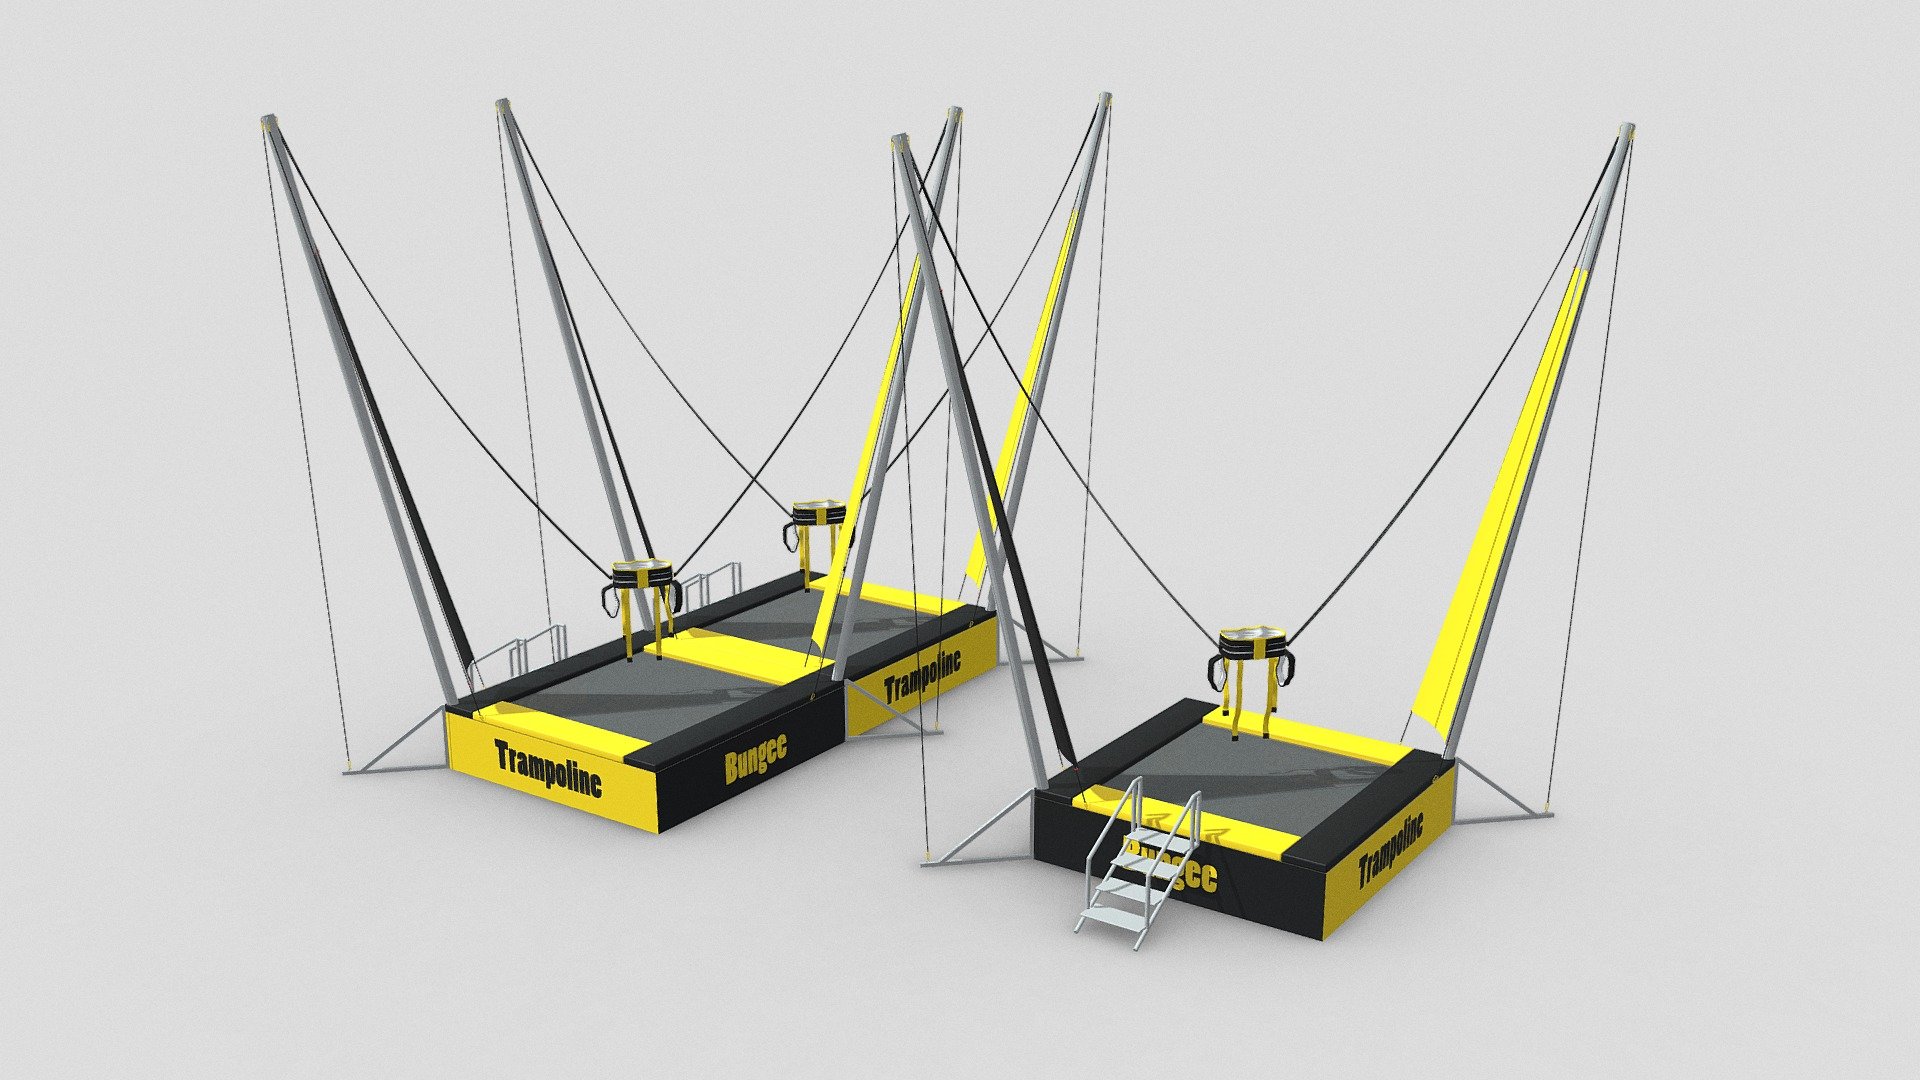 Single &amp; Dubel Bungee Trampoline with jumping mat.

Special sport jumping and bouncing recreational activity device, used for trampolining or trampoline gymnastics.

For modern extreme sport equipment, sport jumping accessories, sport bouncing devices, recreational activity equipment, trampolining gymnastic sport, and trampoline gymnastics projects design.

Bungee Trampoline is a high quality, photo real 3d model that will enhance detail and realism to any of your rendering projects. The model has a fully textured, detailed design that allows for close-up renders, and was originally modeled in 3ds Max 2017 and rendered with V-Ray. Renders have no postprocessing.

Hope you like it!

Ready to render Like previwe - Bungee Trampoline - Buy Royalty Free 3D model by HarmonyLands (@masoudmirzahoseini) 3d model